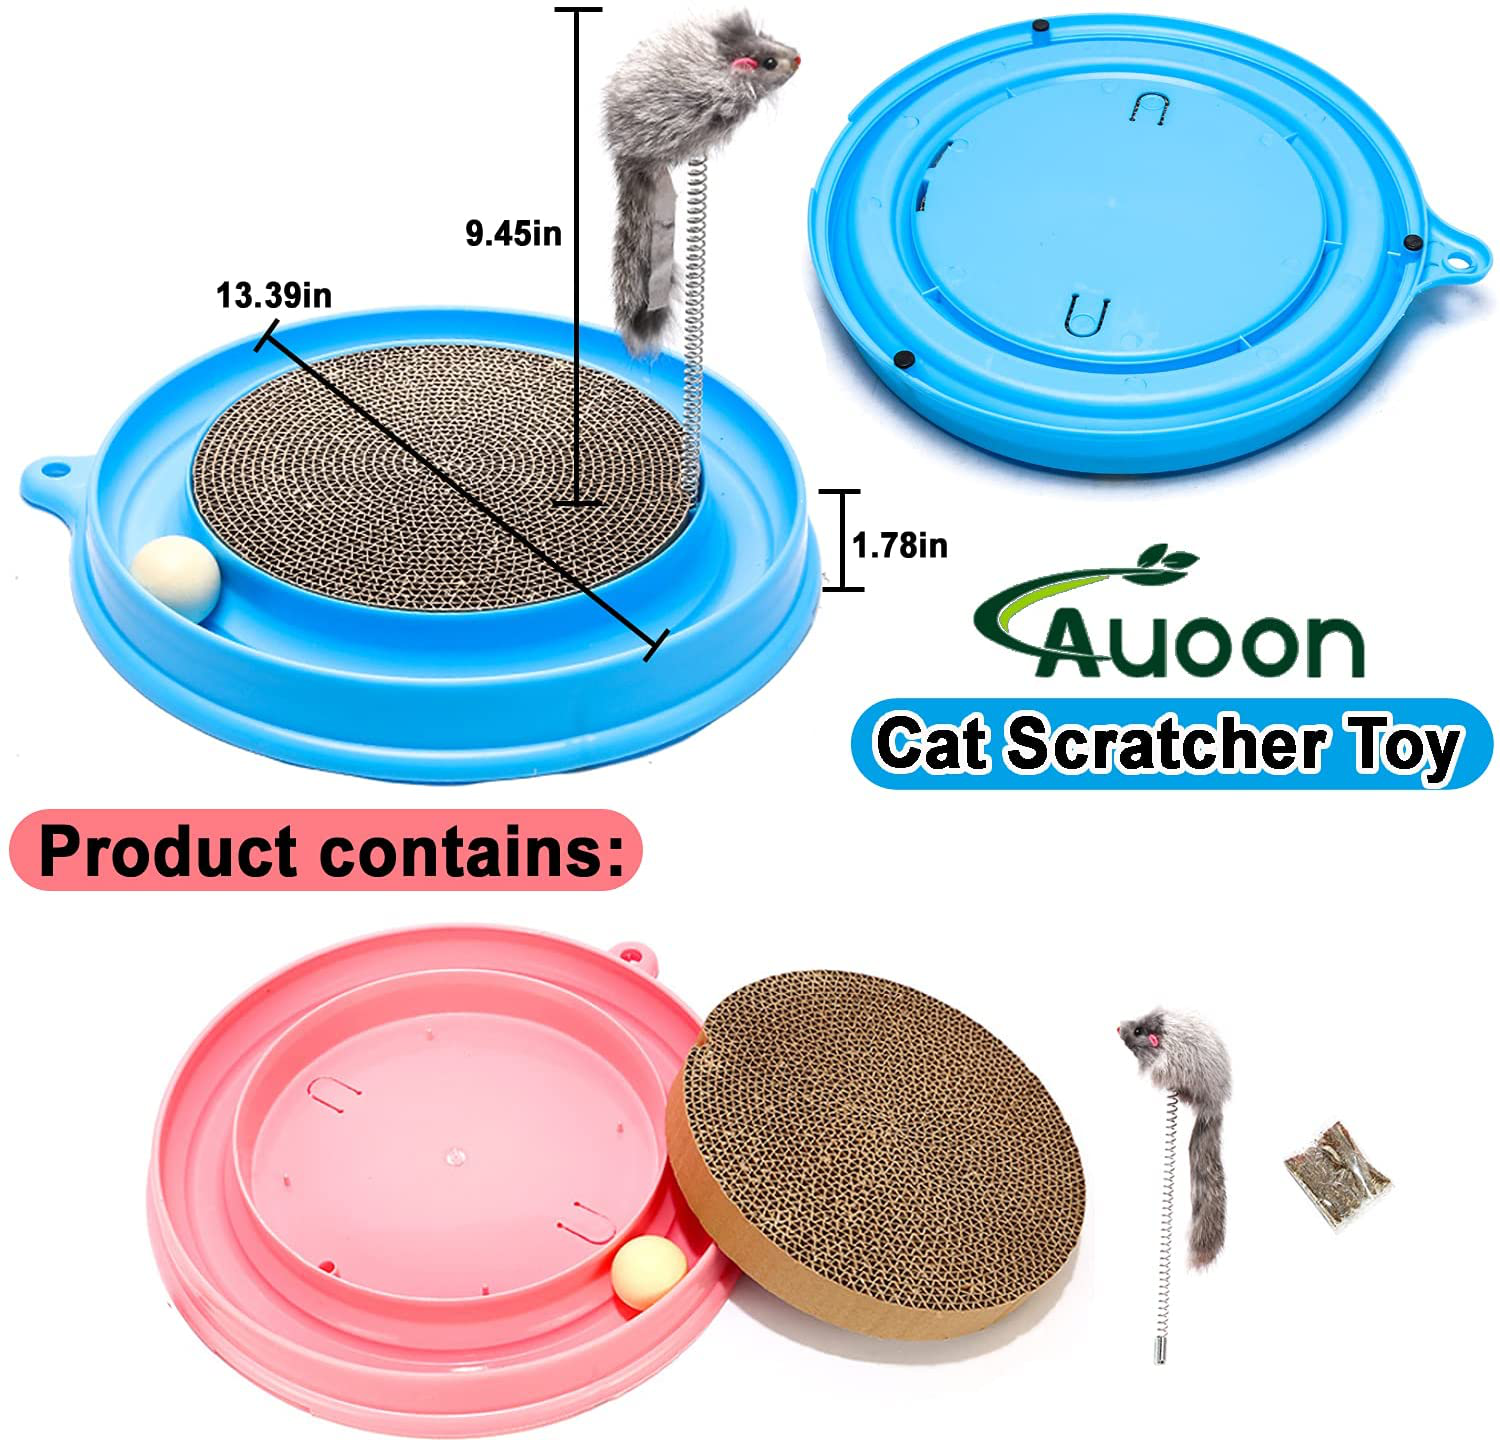 AUOON Cat Scratcher Toy, Cat Toy, Scratch Pad,Scratching Toy,Post Pad Interactive Training Exercise Mouse Play Toy with Ball